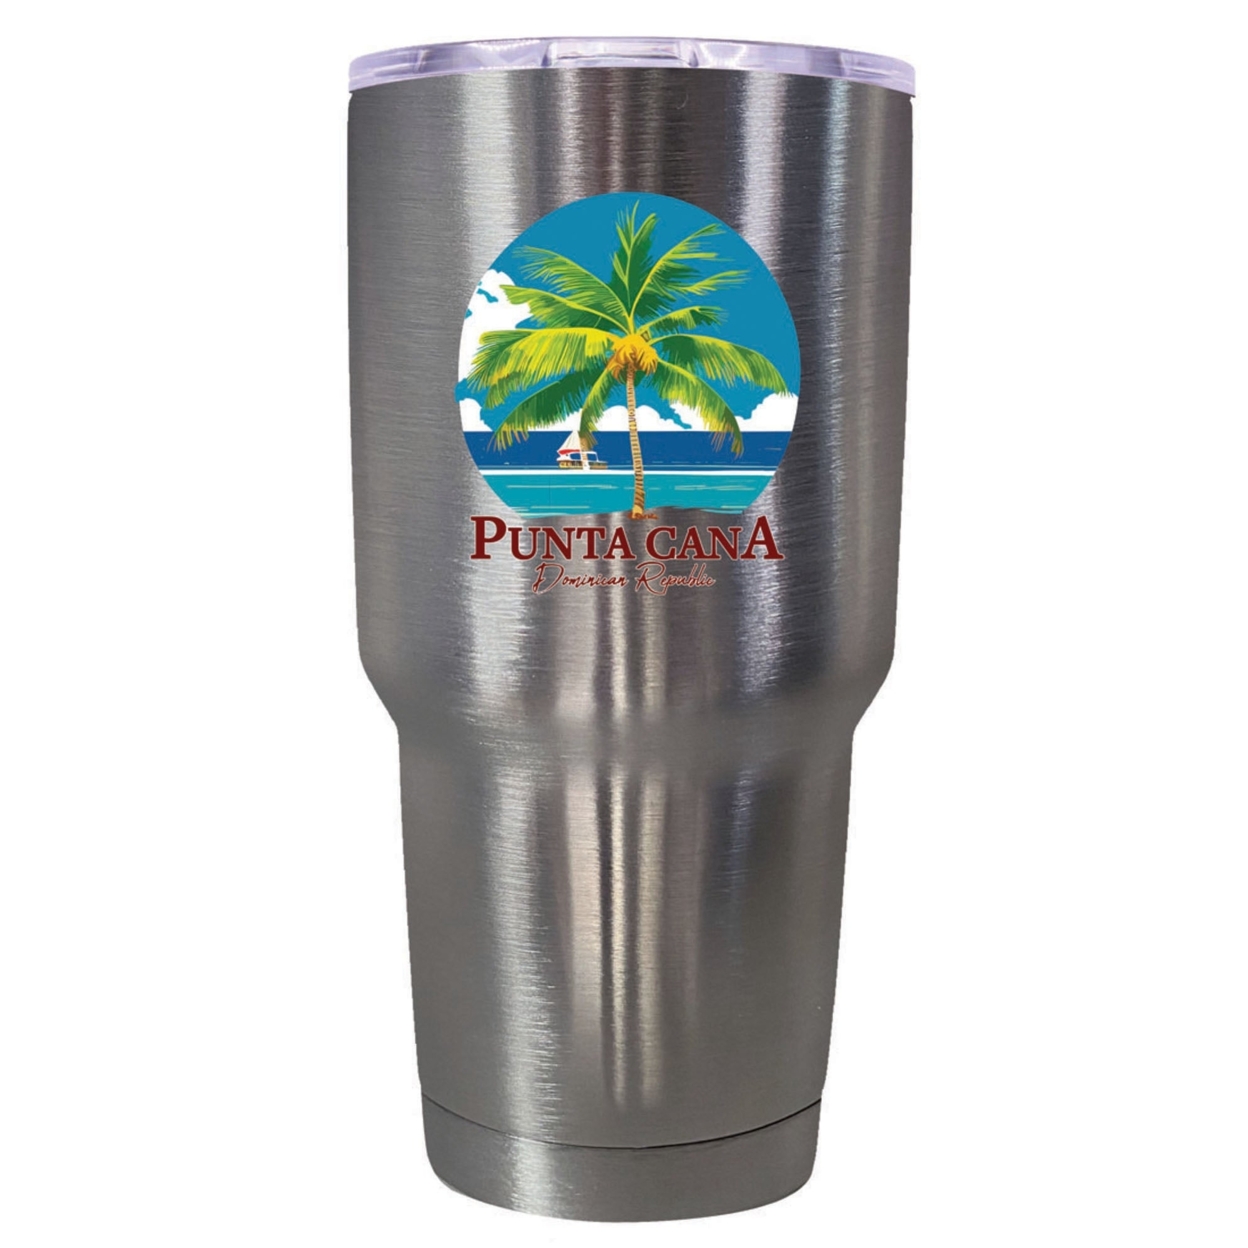 Punta Cana Dominican Republic Souvenir 24 Oz Insulated Stainless Steel Tumbler - Stainless Steel, PARROT B